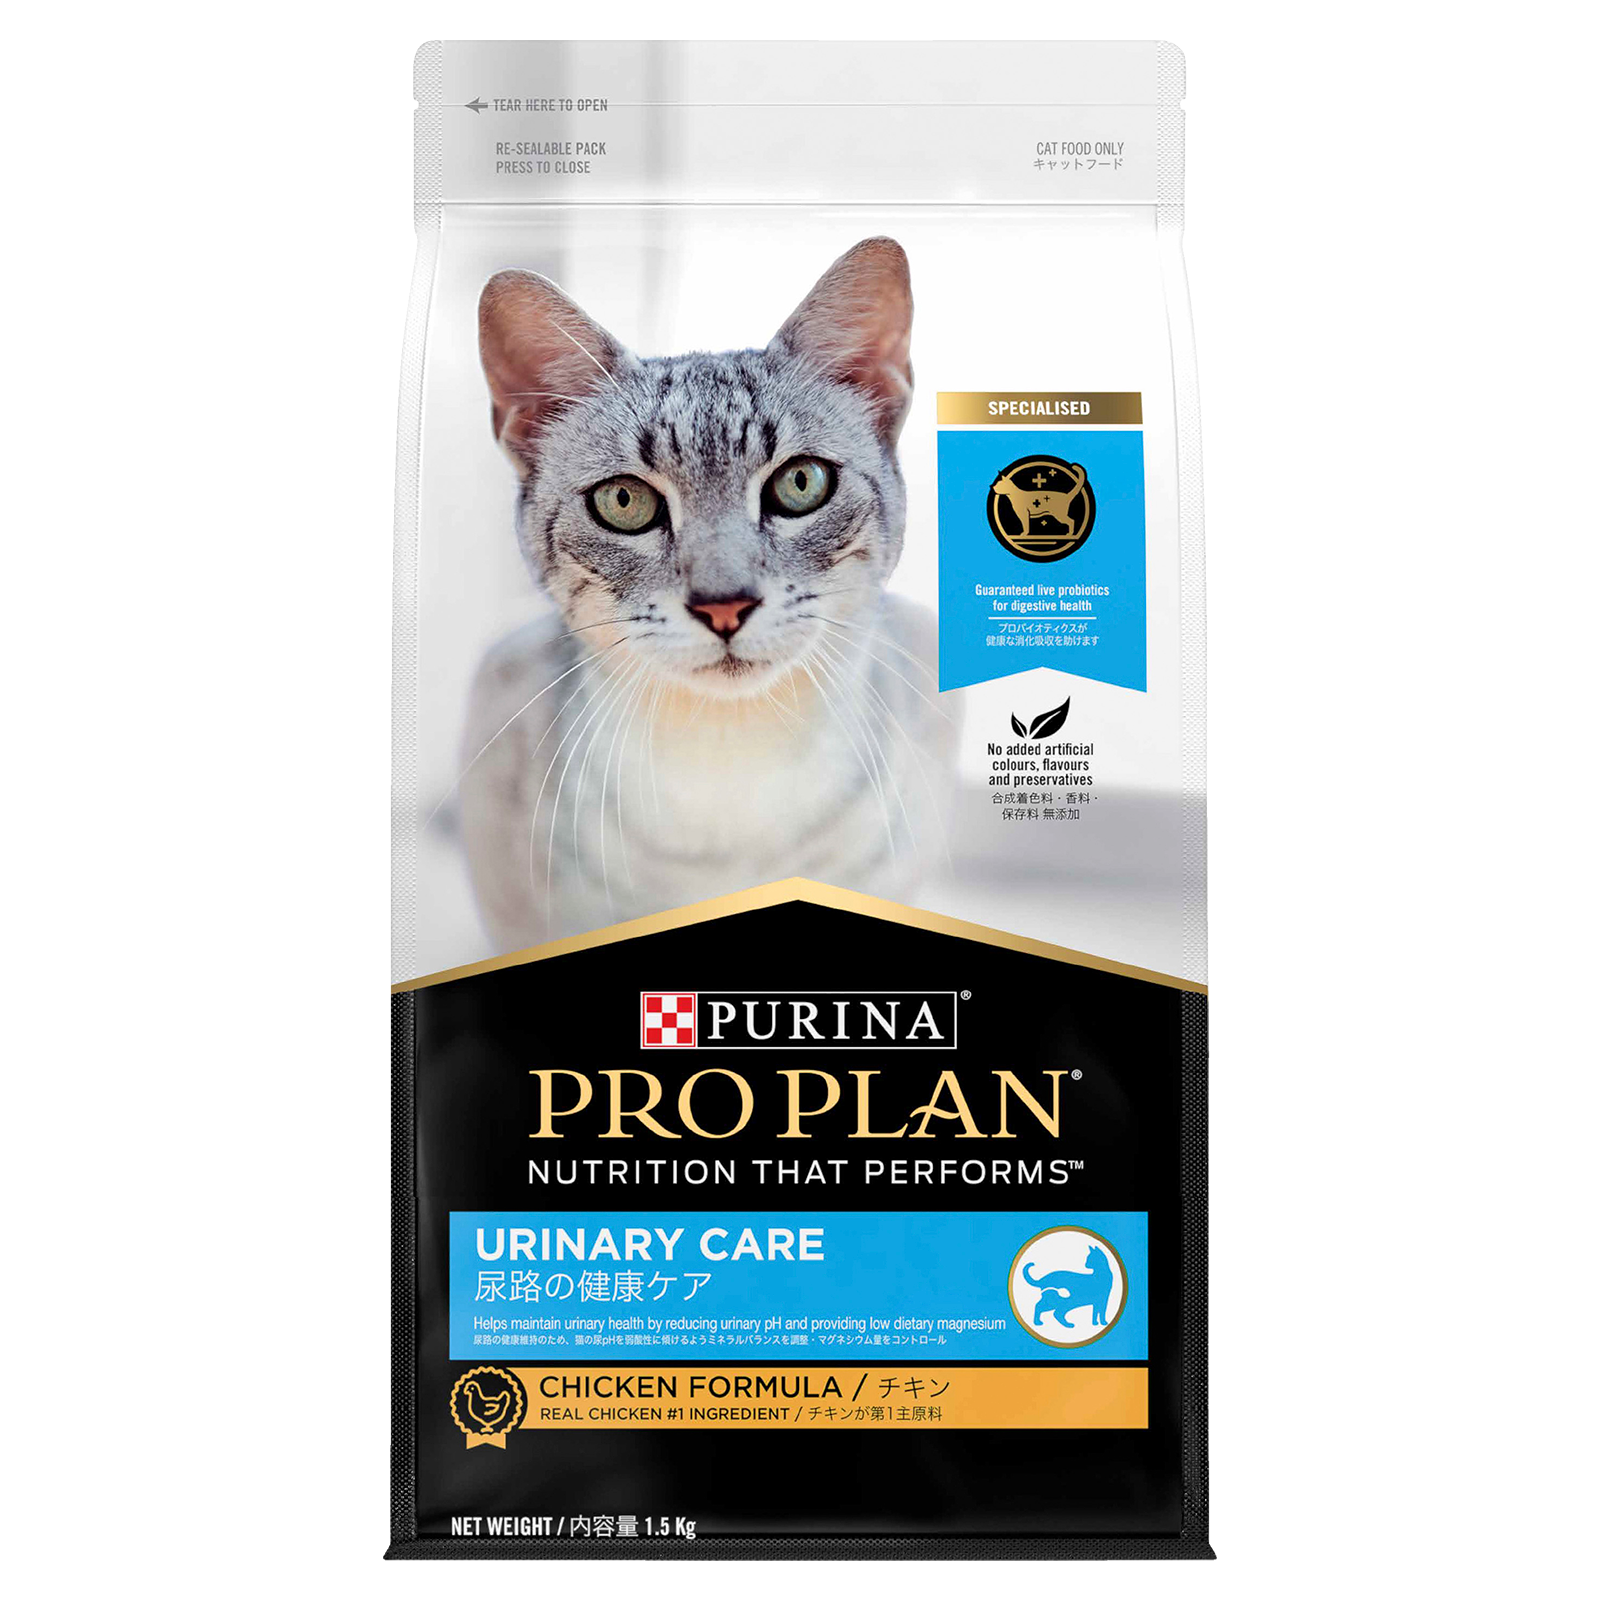 Pro Plan Cat Food Adult Urinary Care Chicken